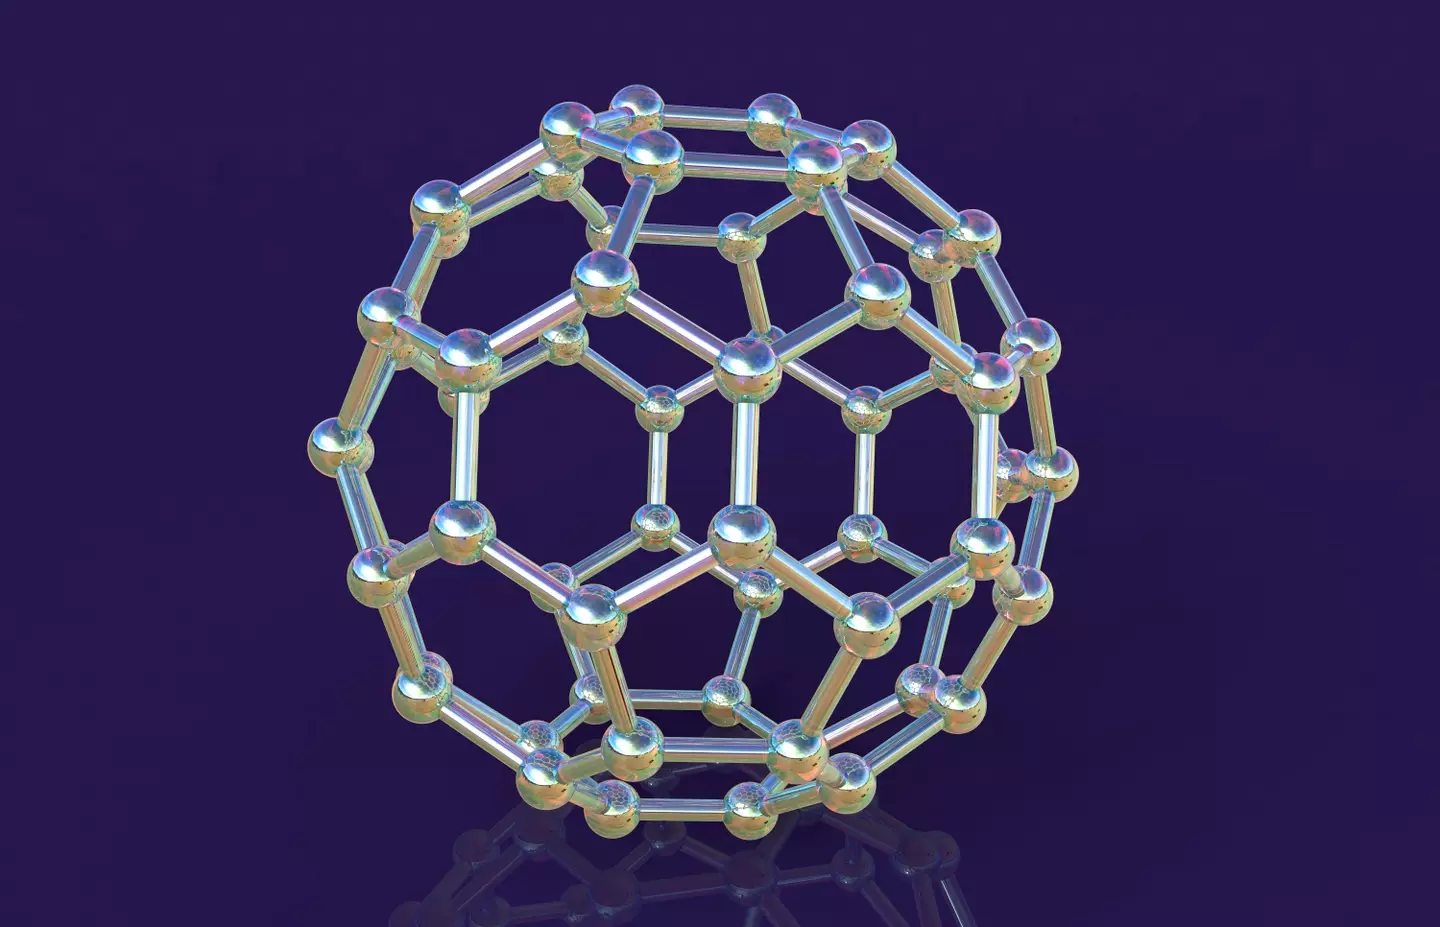 A illustration of a buckminsterfullerene atom, showing the distinctive 'cage' structure.